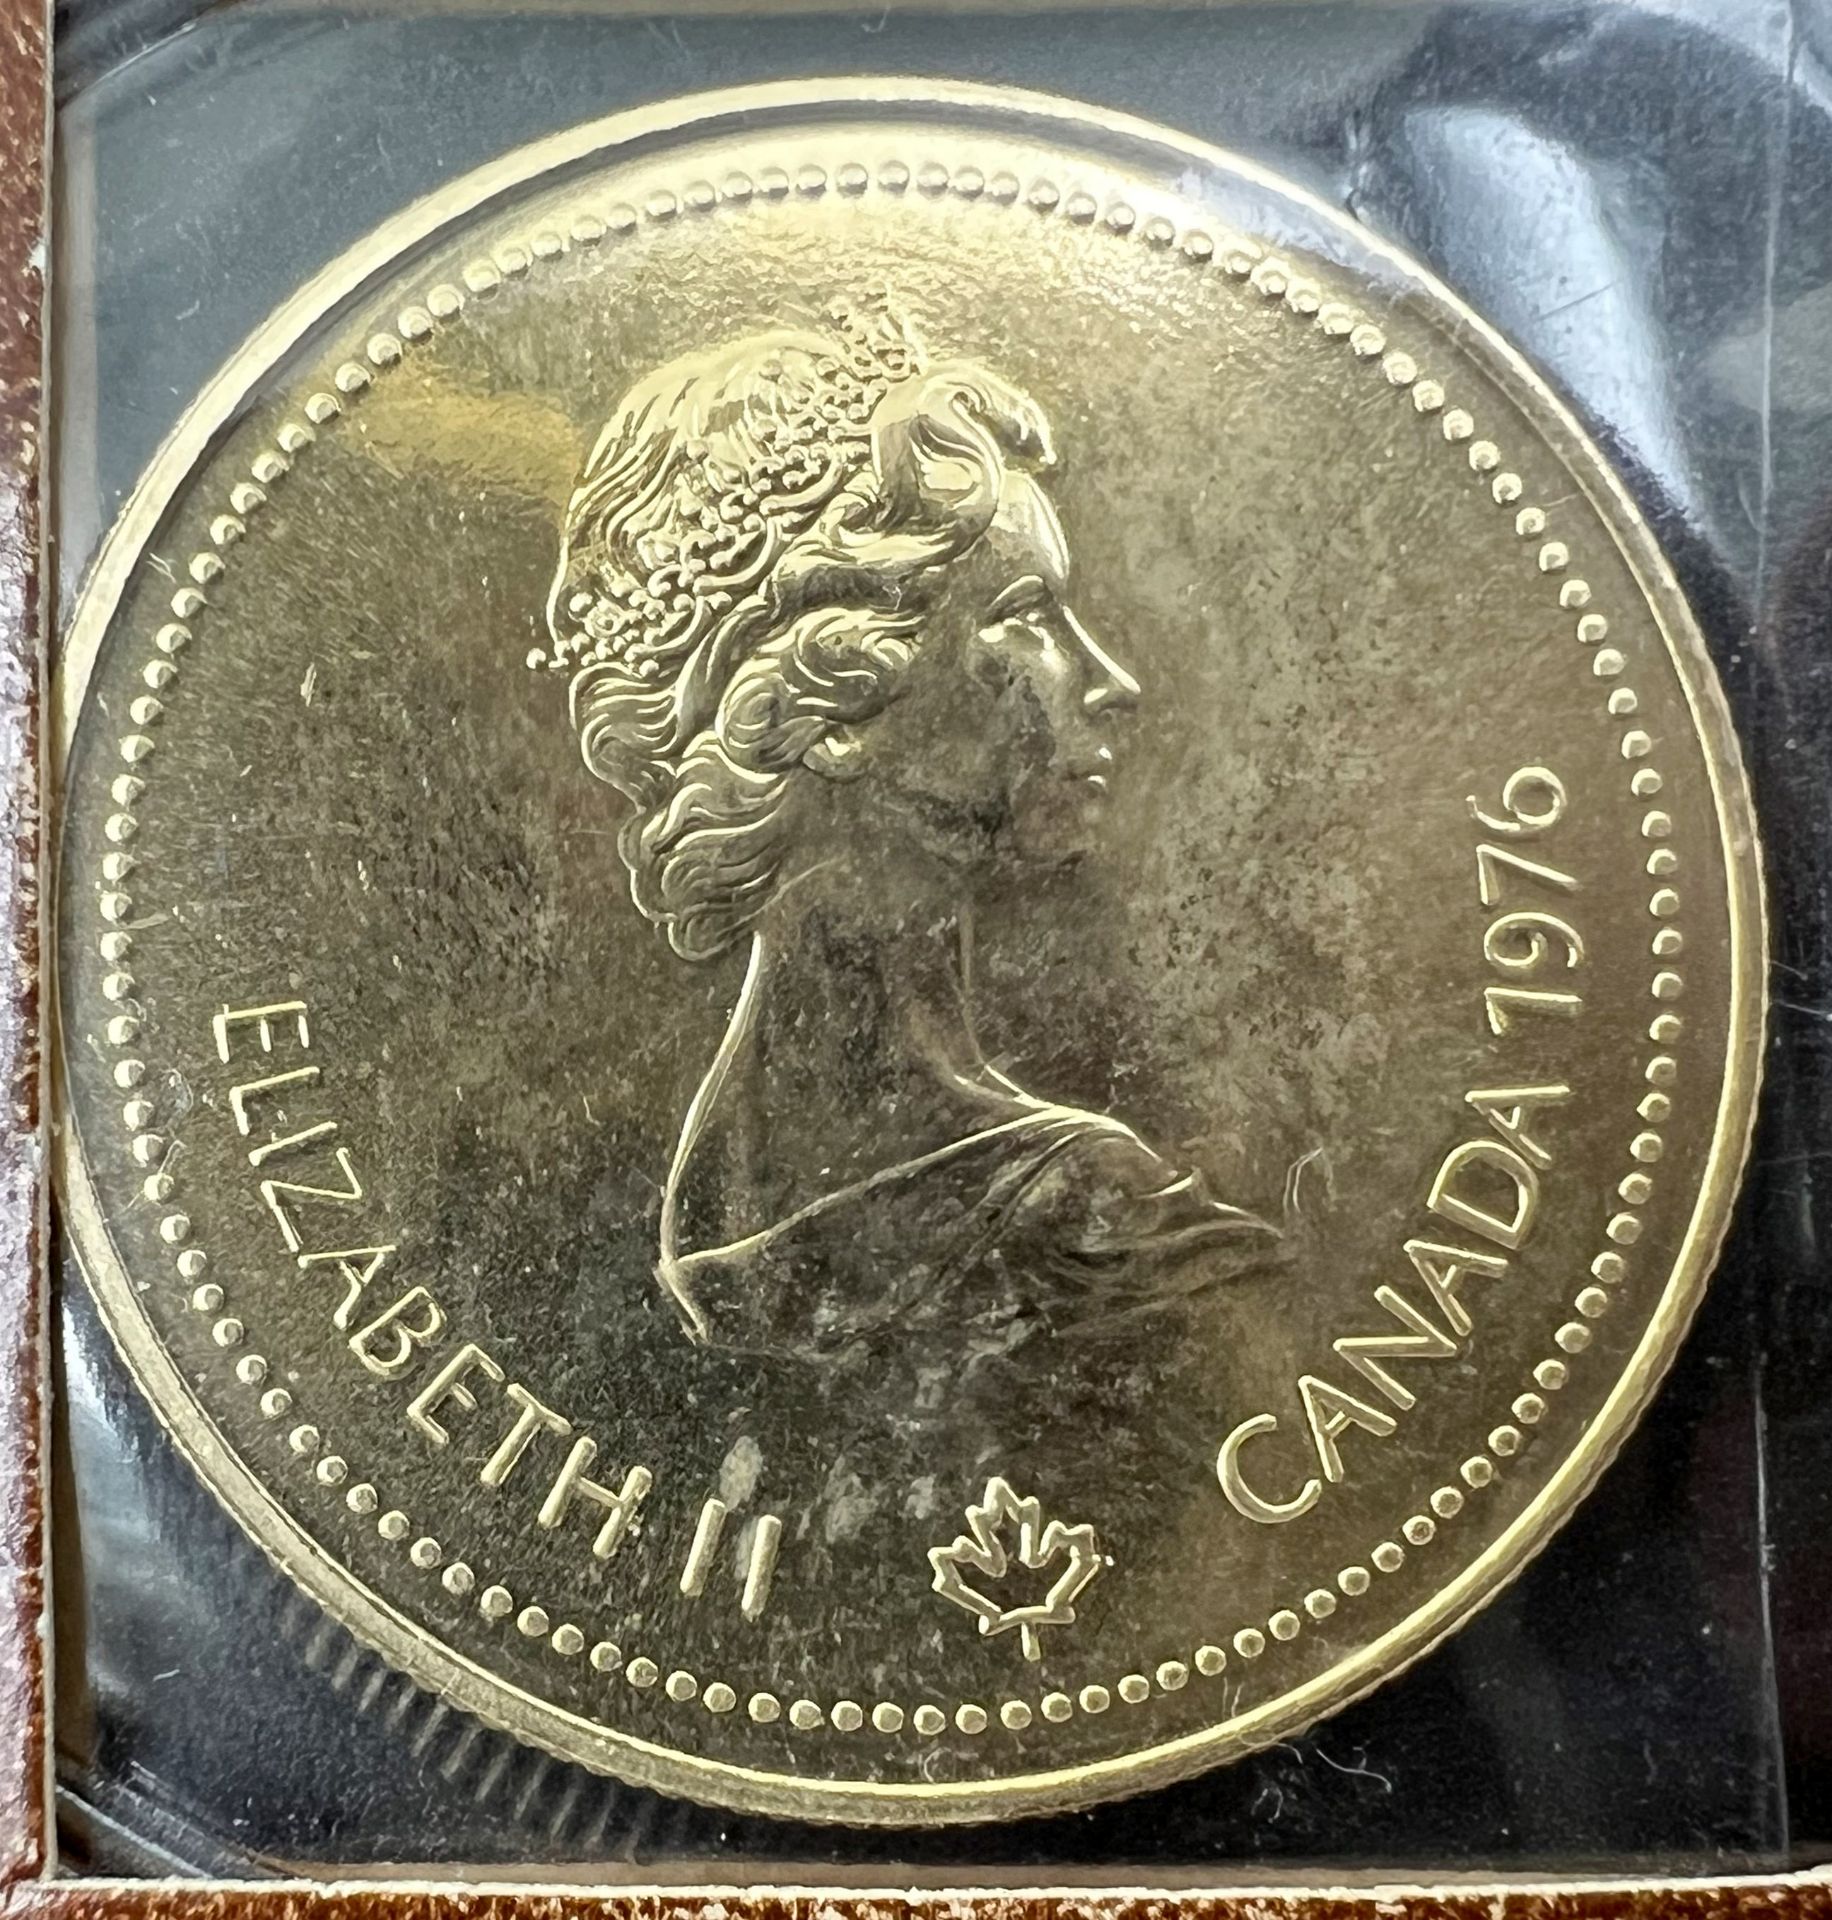 Gold coin 100 dollars "21st Olympic Games in Montreal / Elizabeth II". Canada 1976. - Image 4 of 4